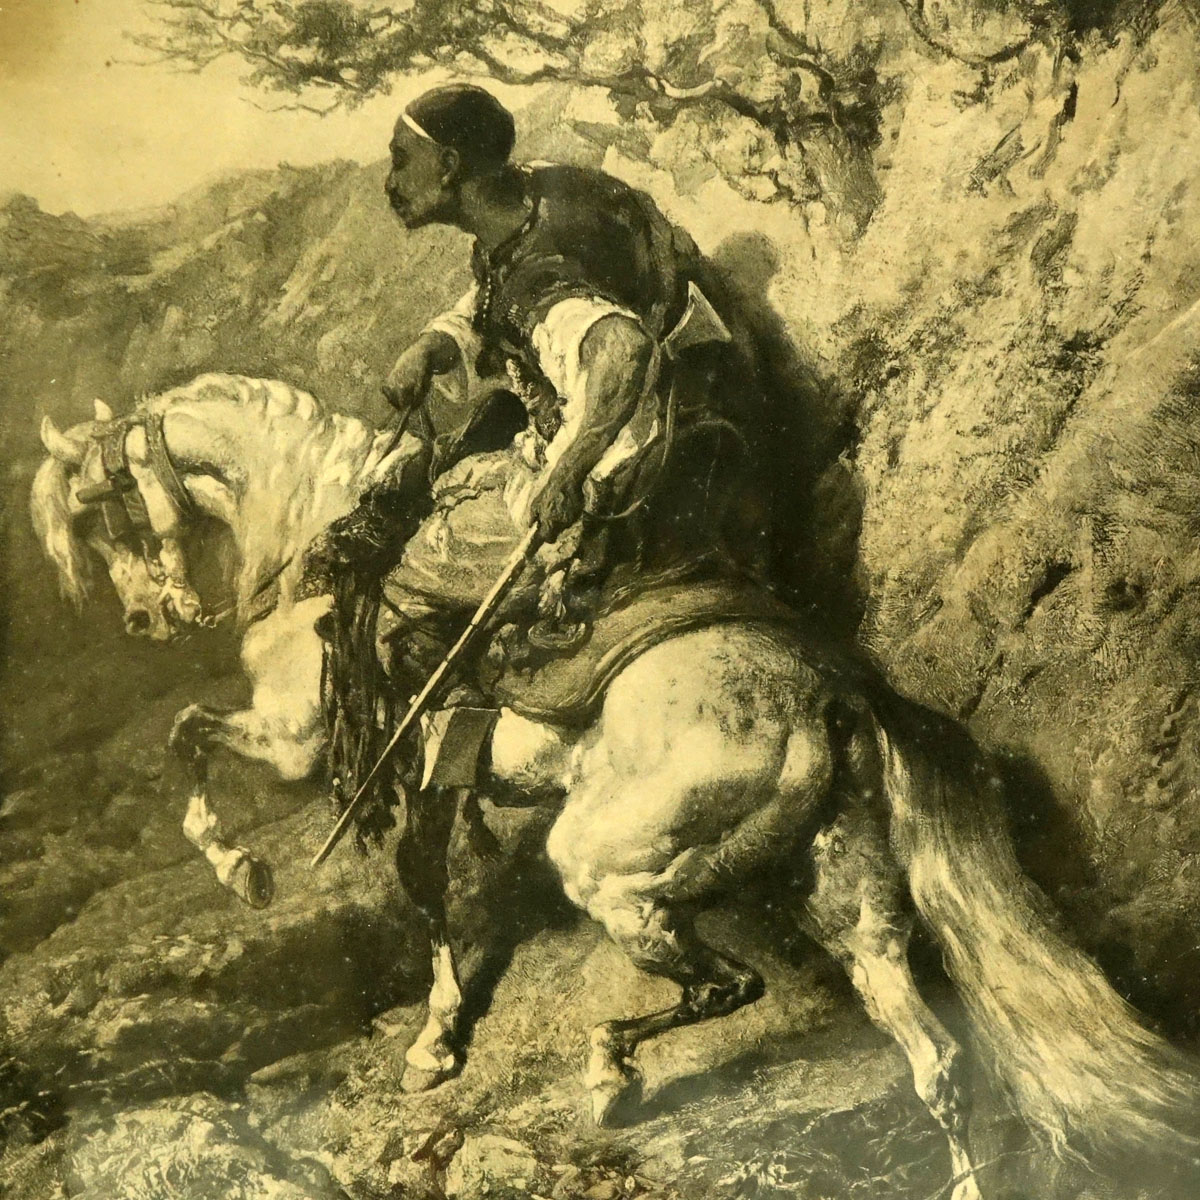 Adolph Schreyer, German  (1828 - 1899) Sepia Tone Lithograph Print, Bedouin on Horseback, Signed in the Plate. Small stain to top left corner.